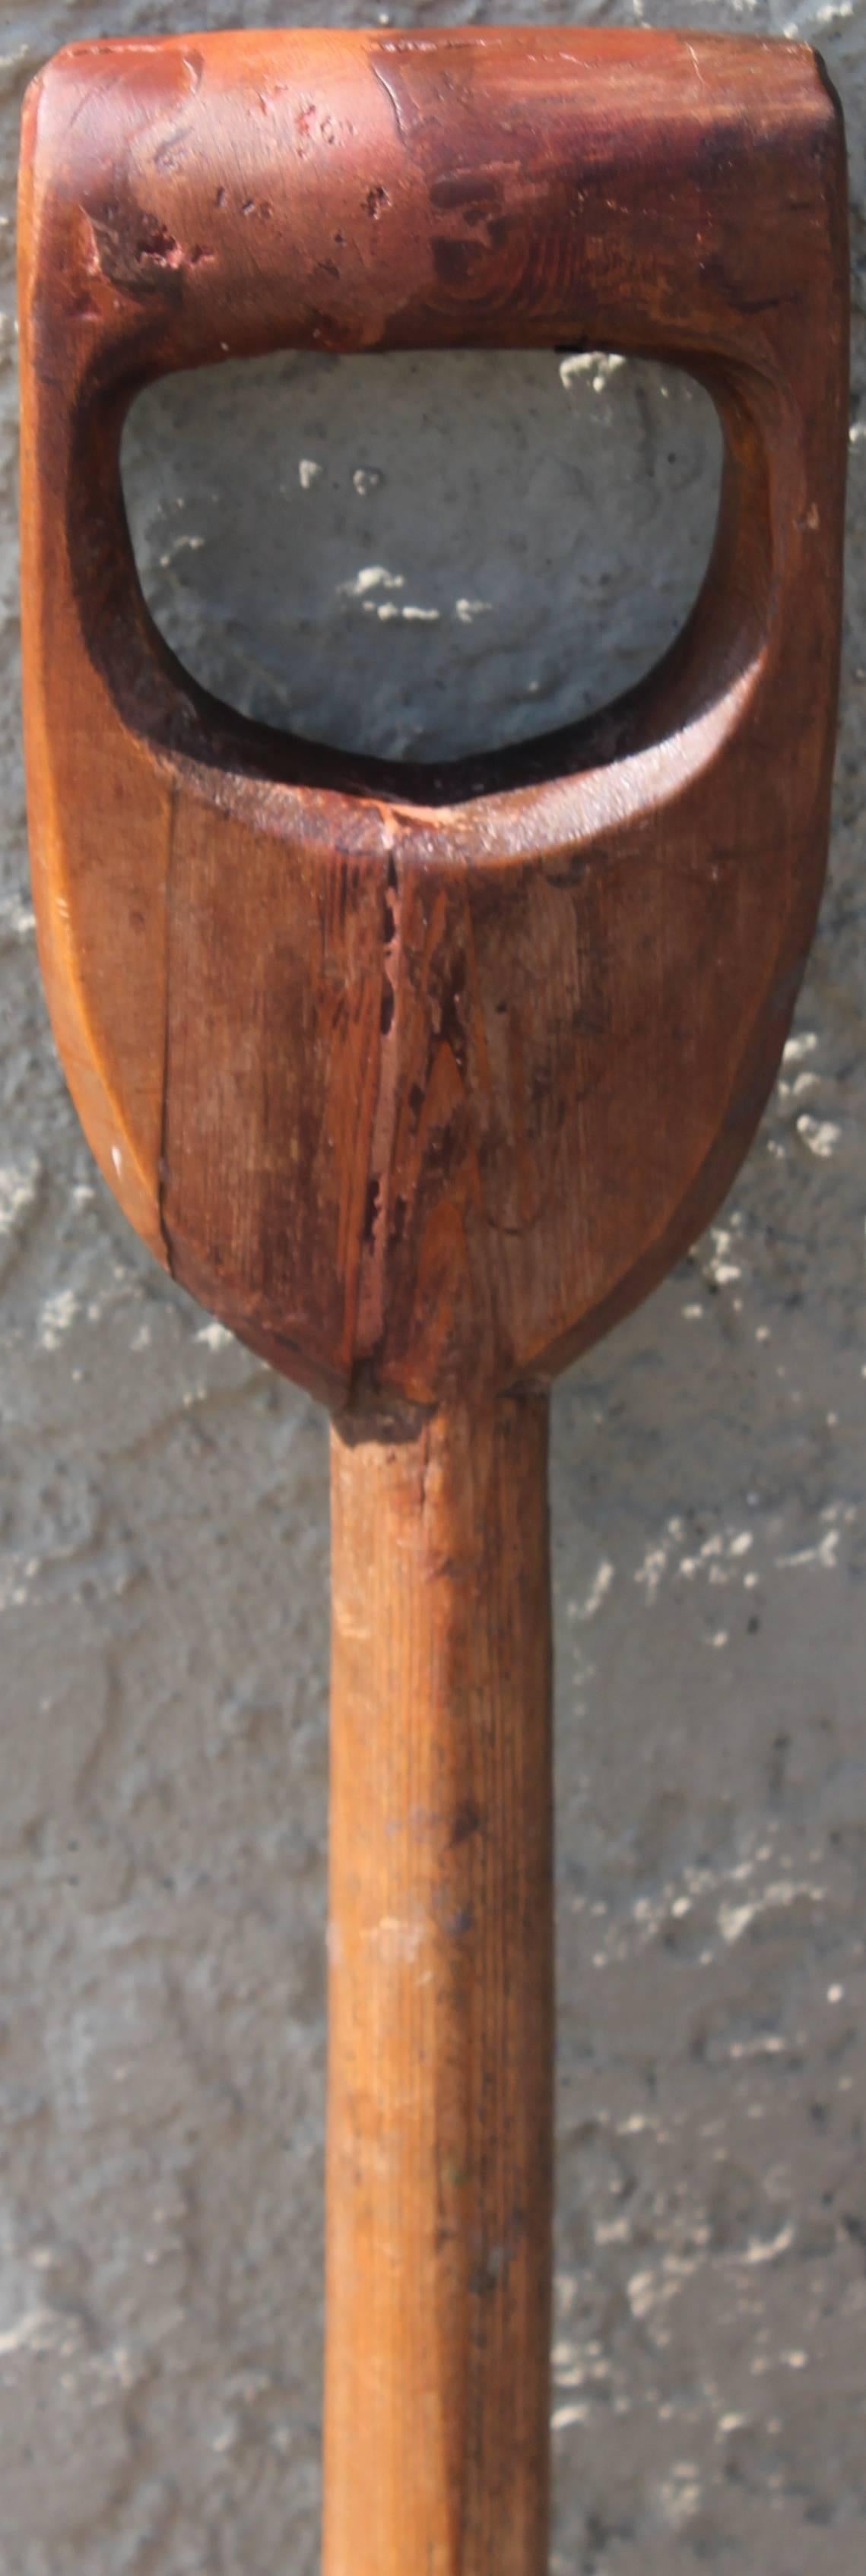 This fine original red painted hand-carved pine shovel was found in New England. The patina is the best. Condition is very good and it does have a lot of nice age wear.